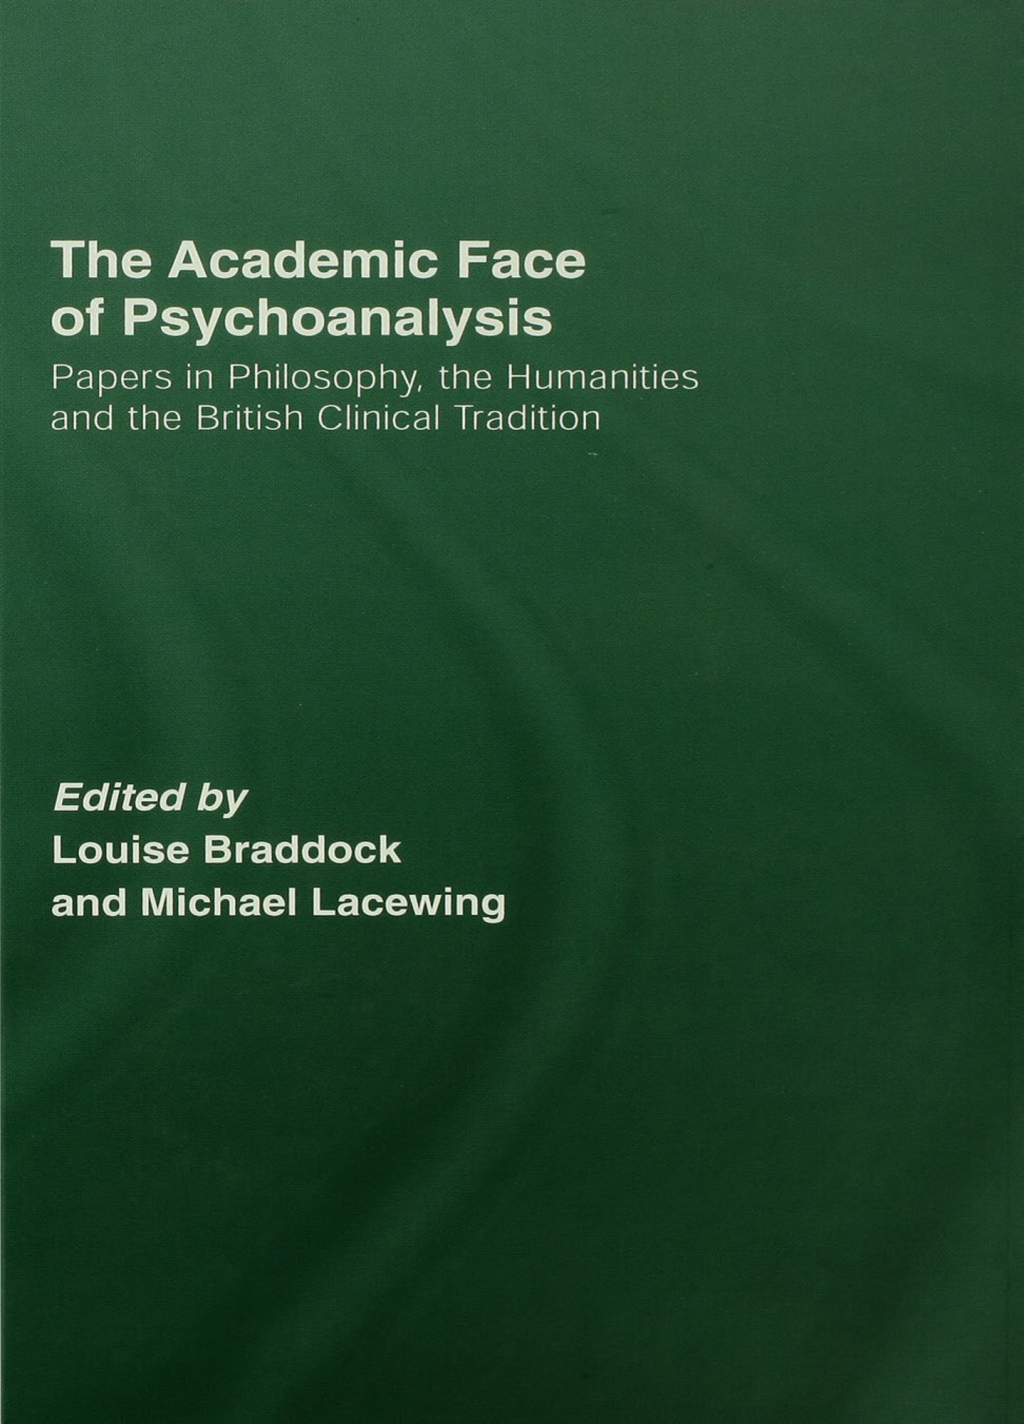 The Academic Face of Psychoanalysis - 1st Edition (eBook Rental)